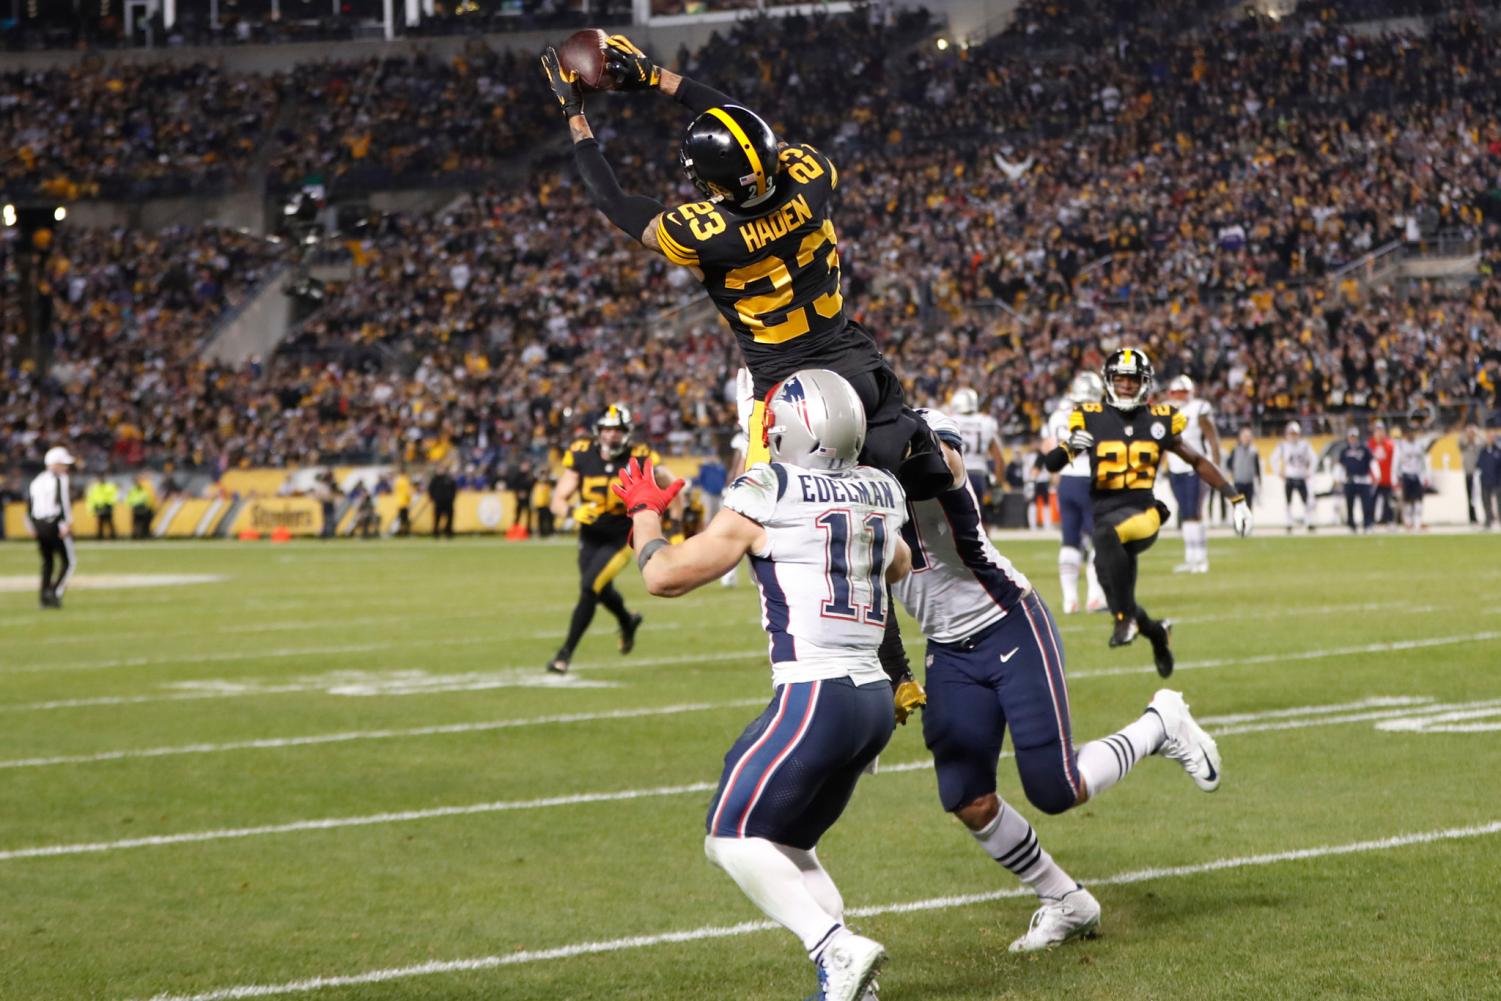 The Pittsburgh Steelers are still alive after last-minute 16-13